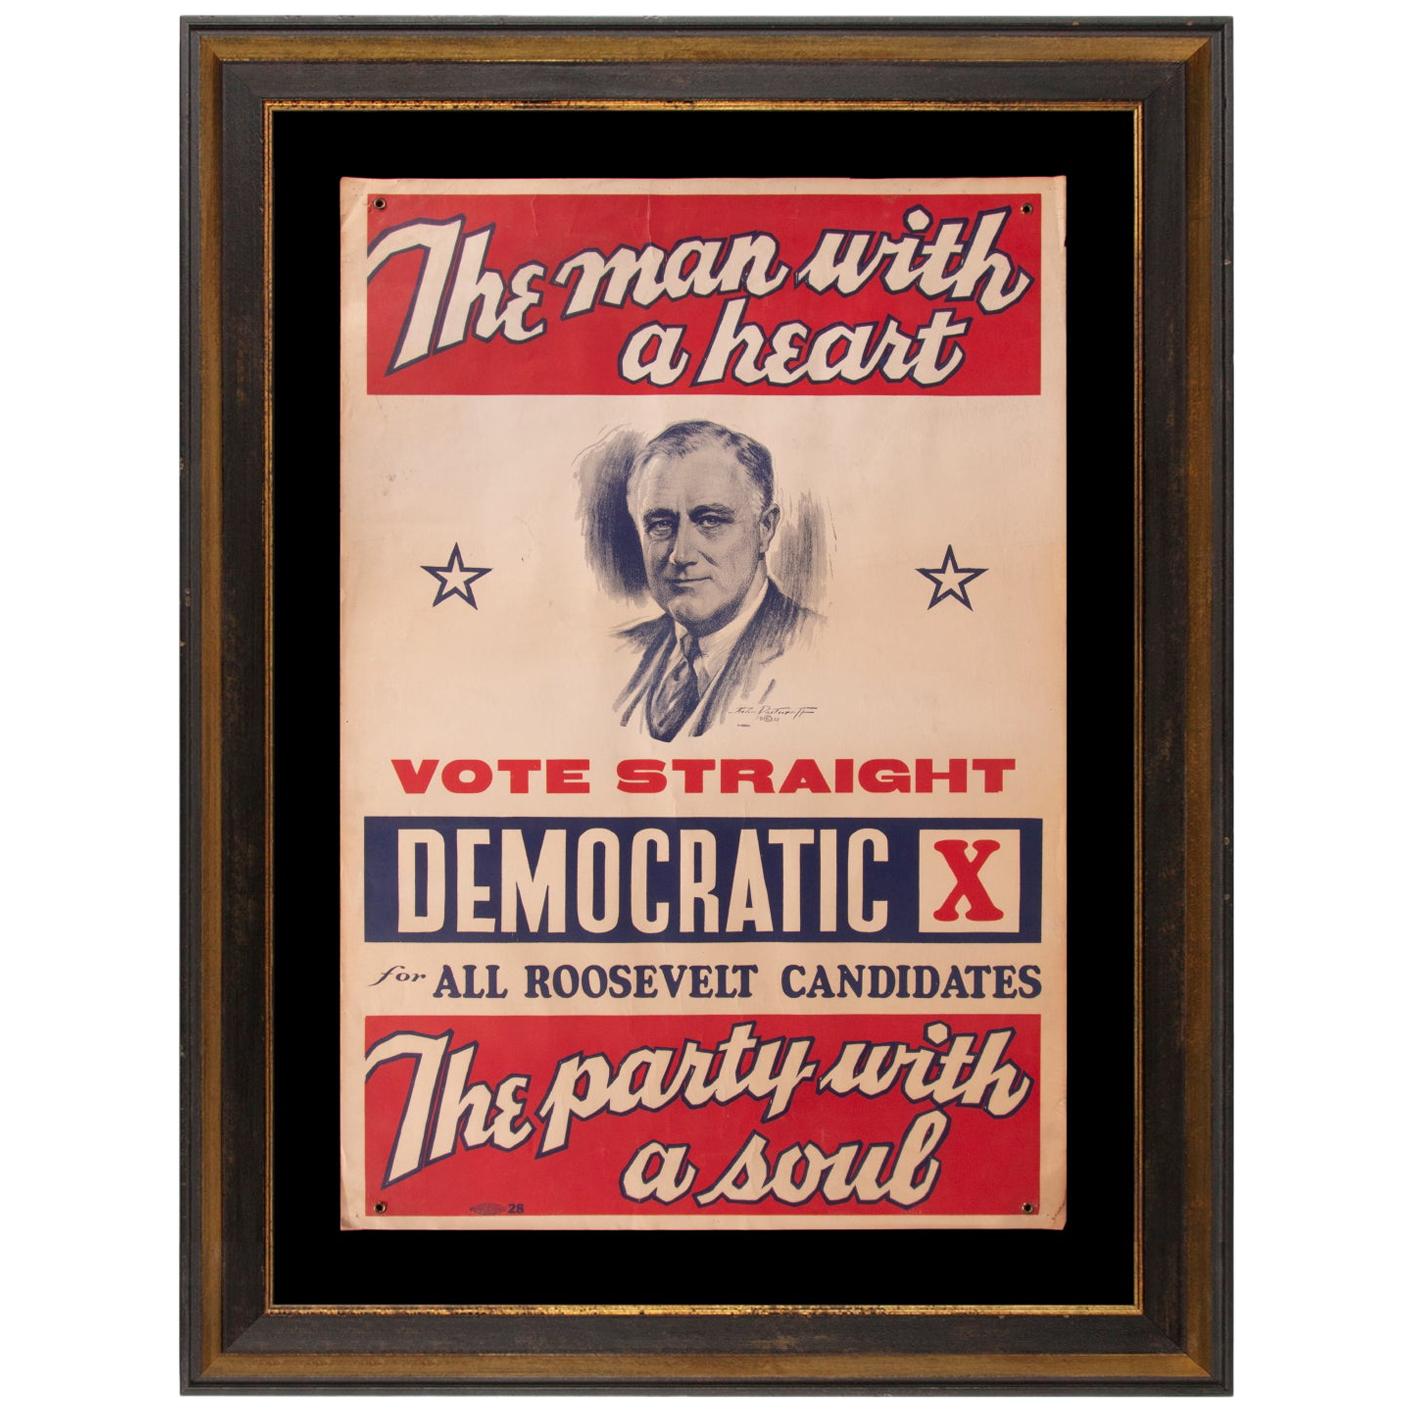 "The Man With A Heart, The Party with A Soul" 1936 Franklin Roosevelt Poster